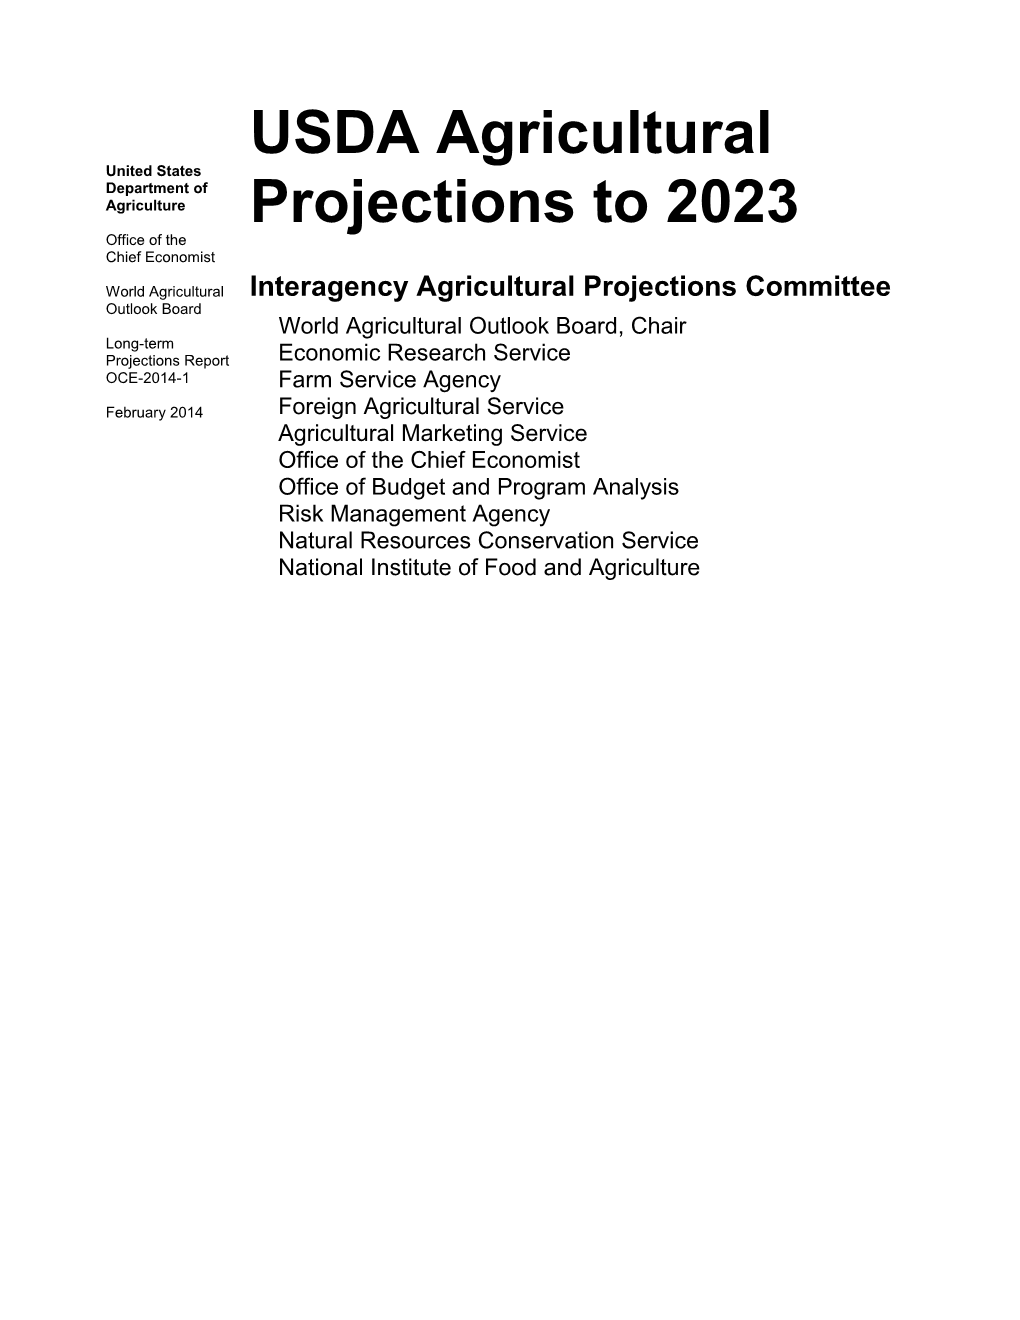 USDA Agricultural Projections to 2023